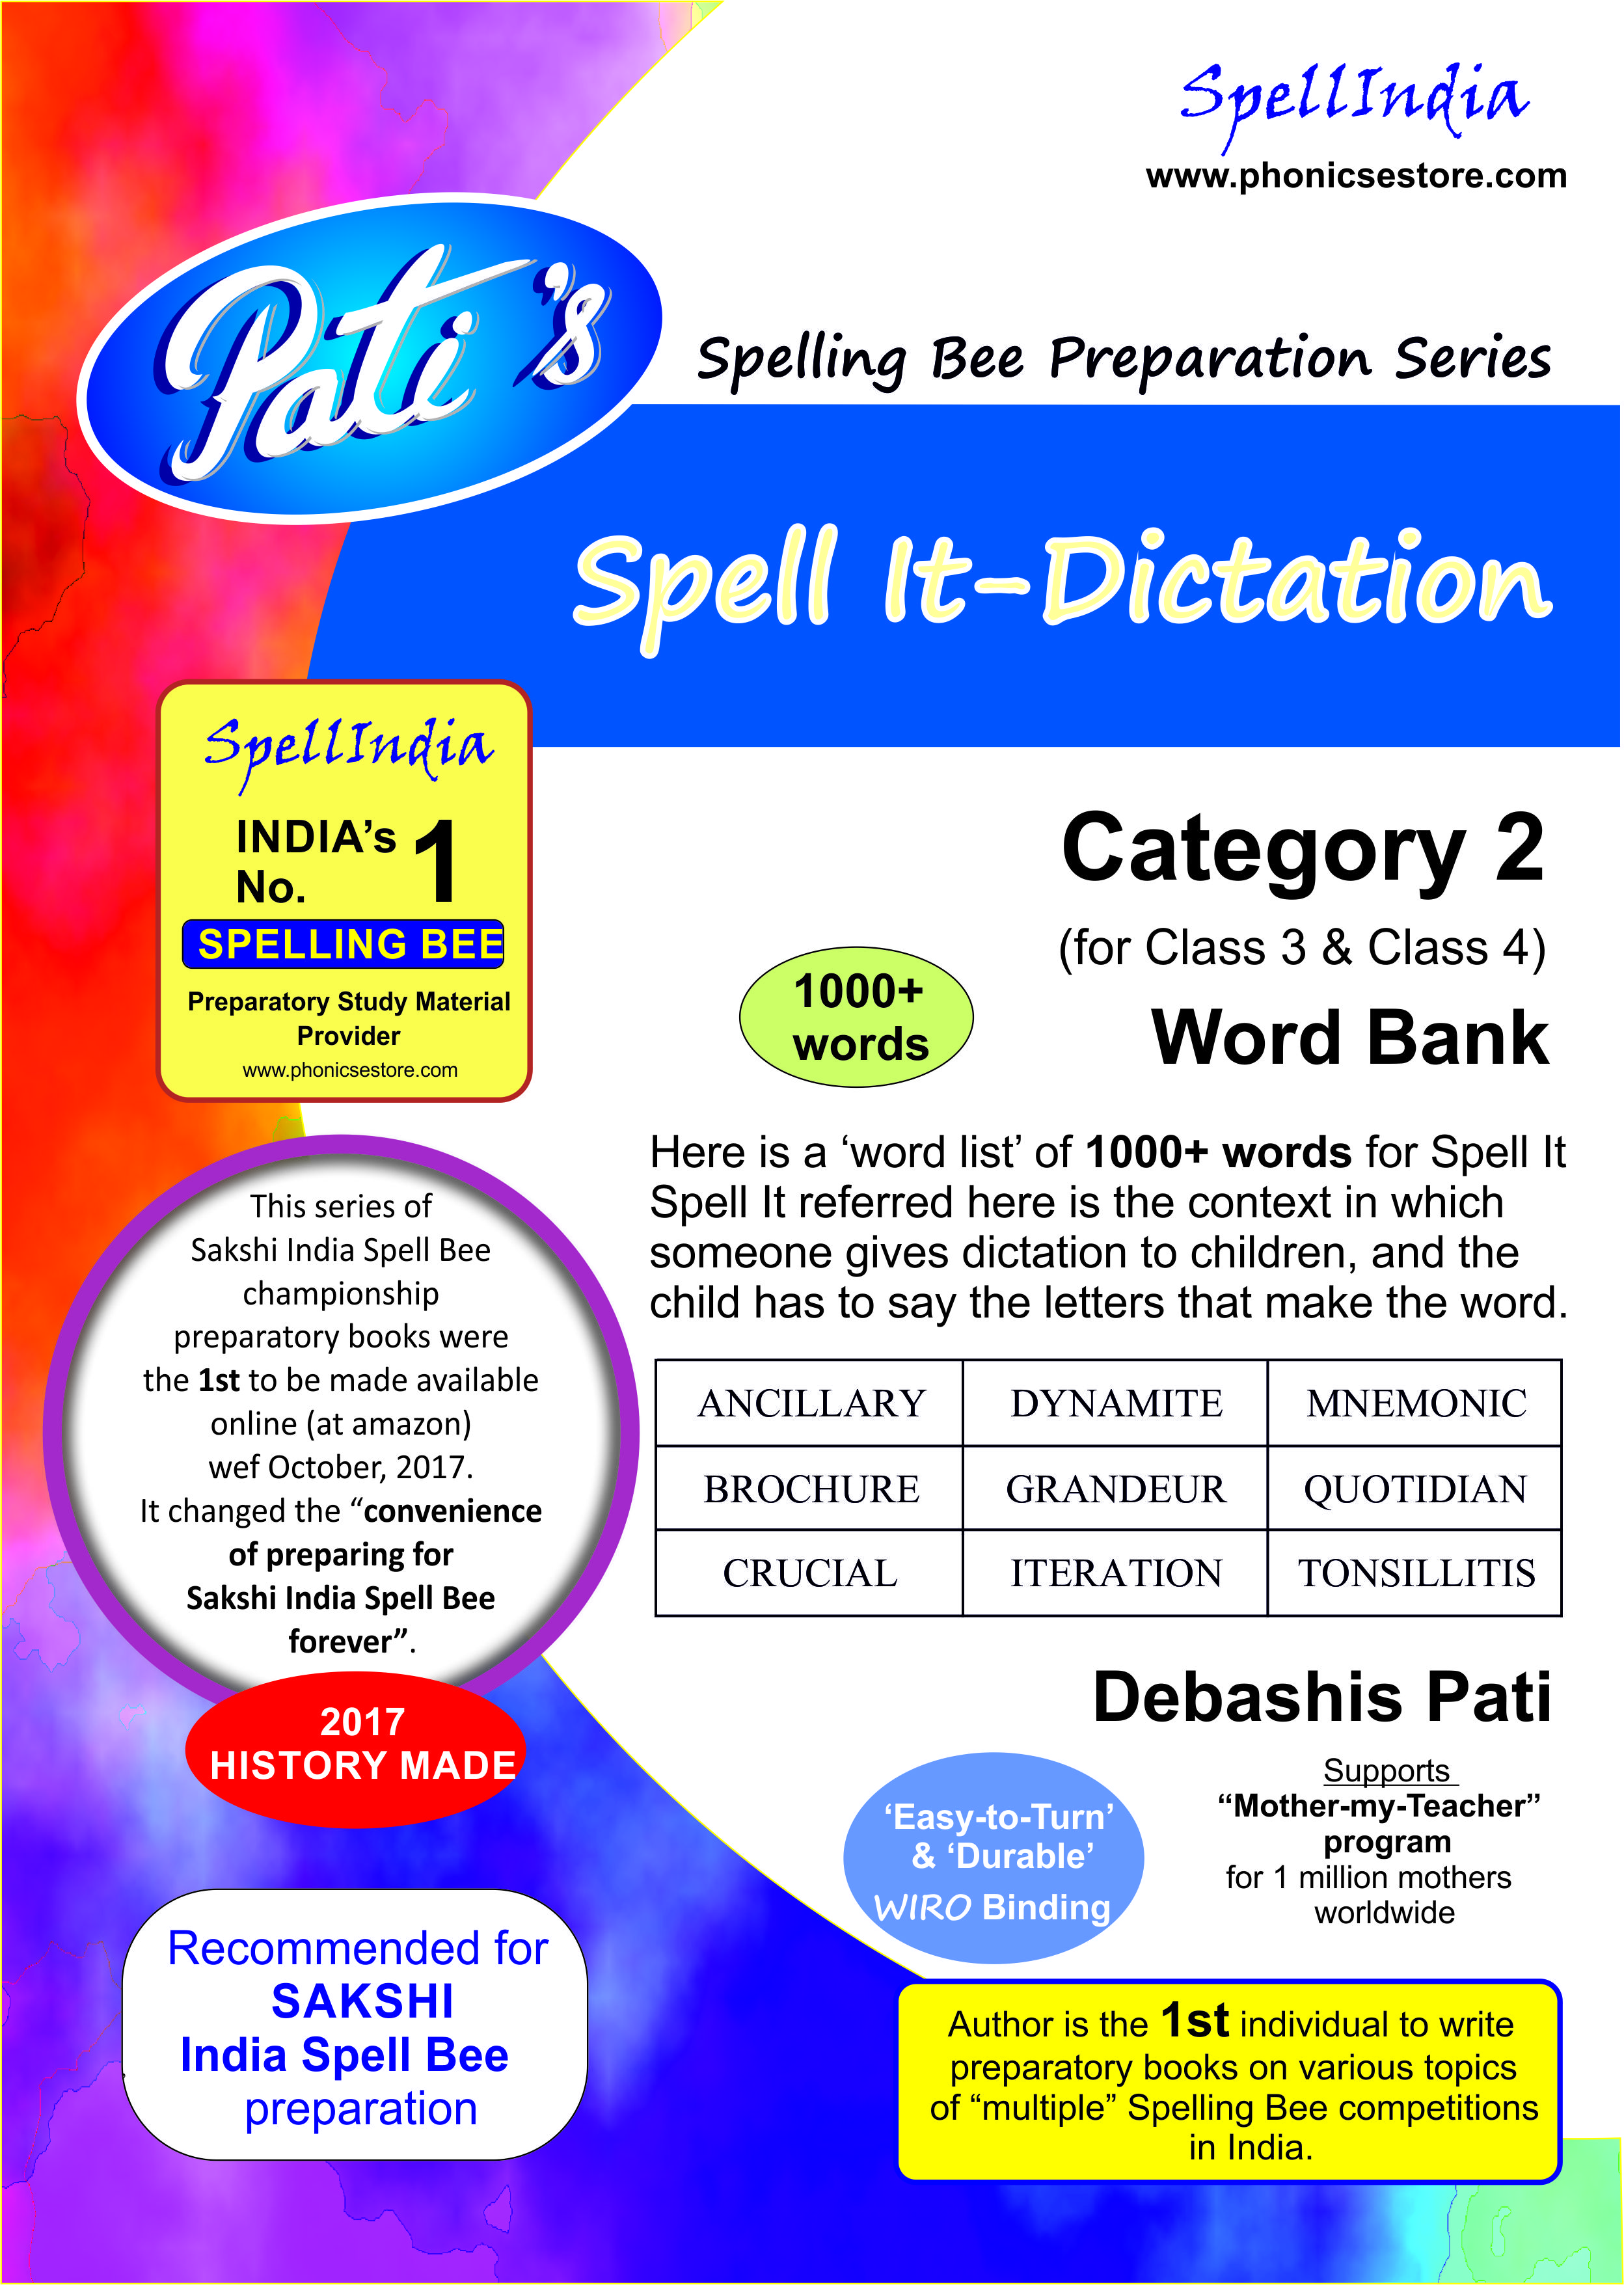 INDIA SPELL BEE SAKSHI CATEGORY 2 CLASS 3  4